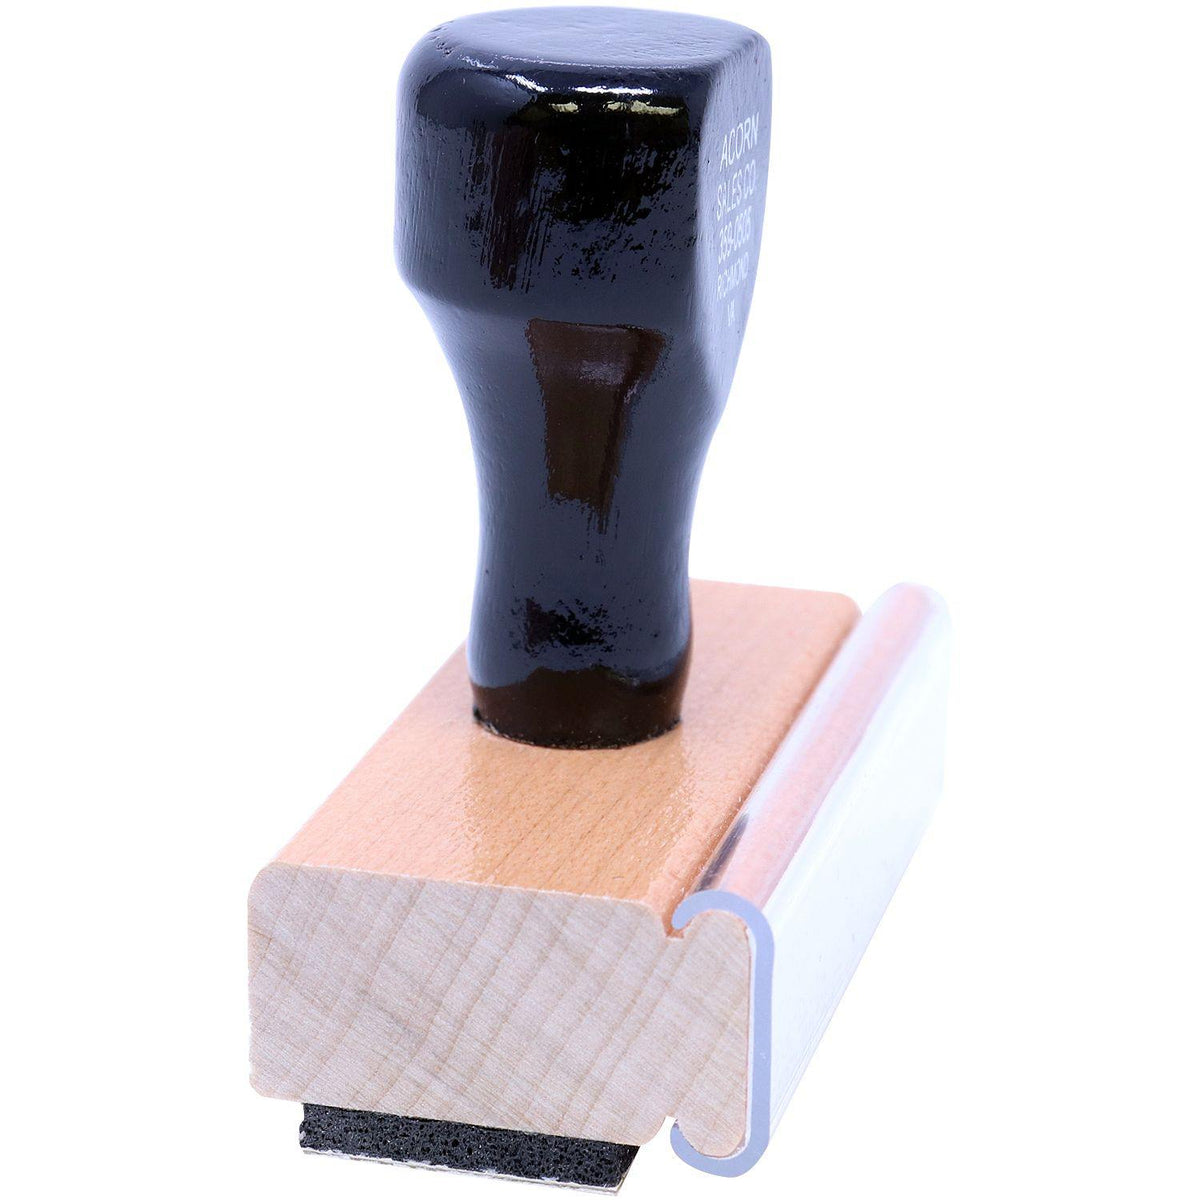 Side View of Bold Draft Rubber Stamp at an Angle